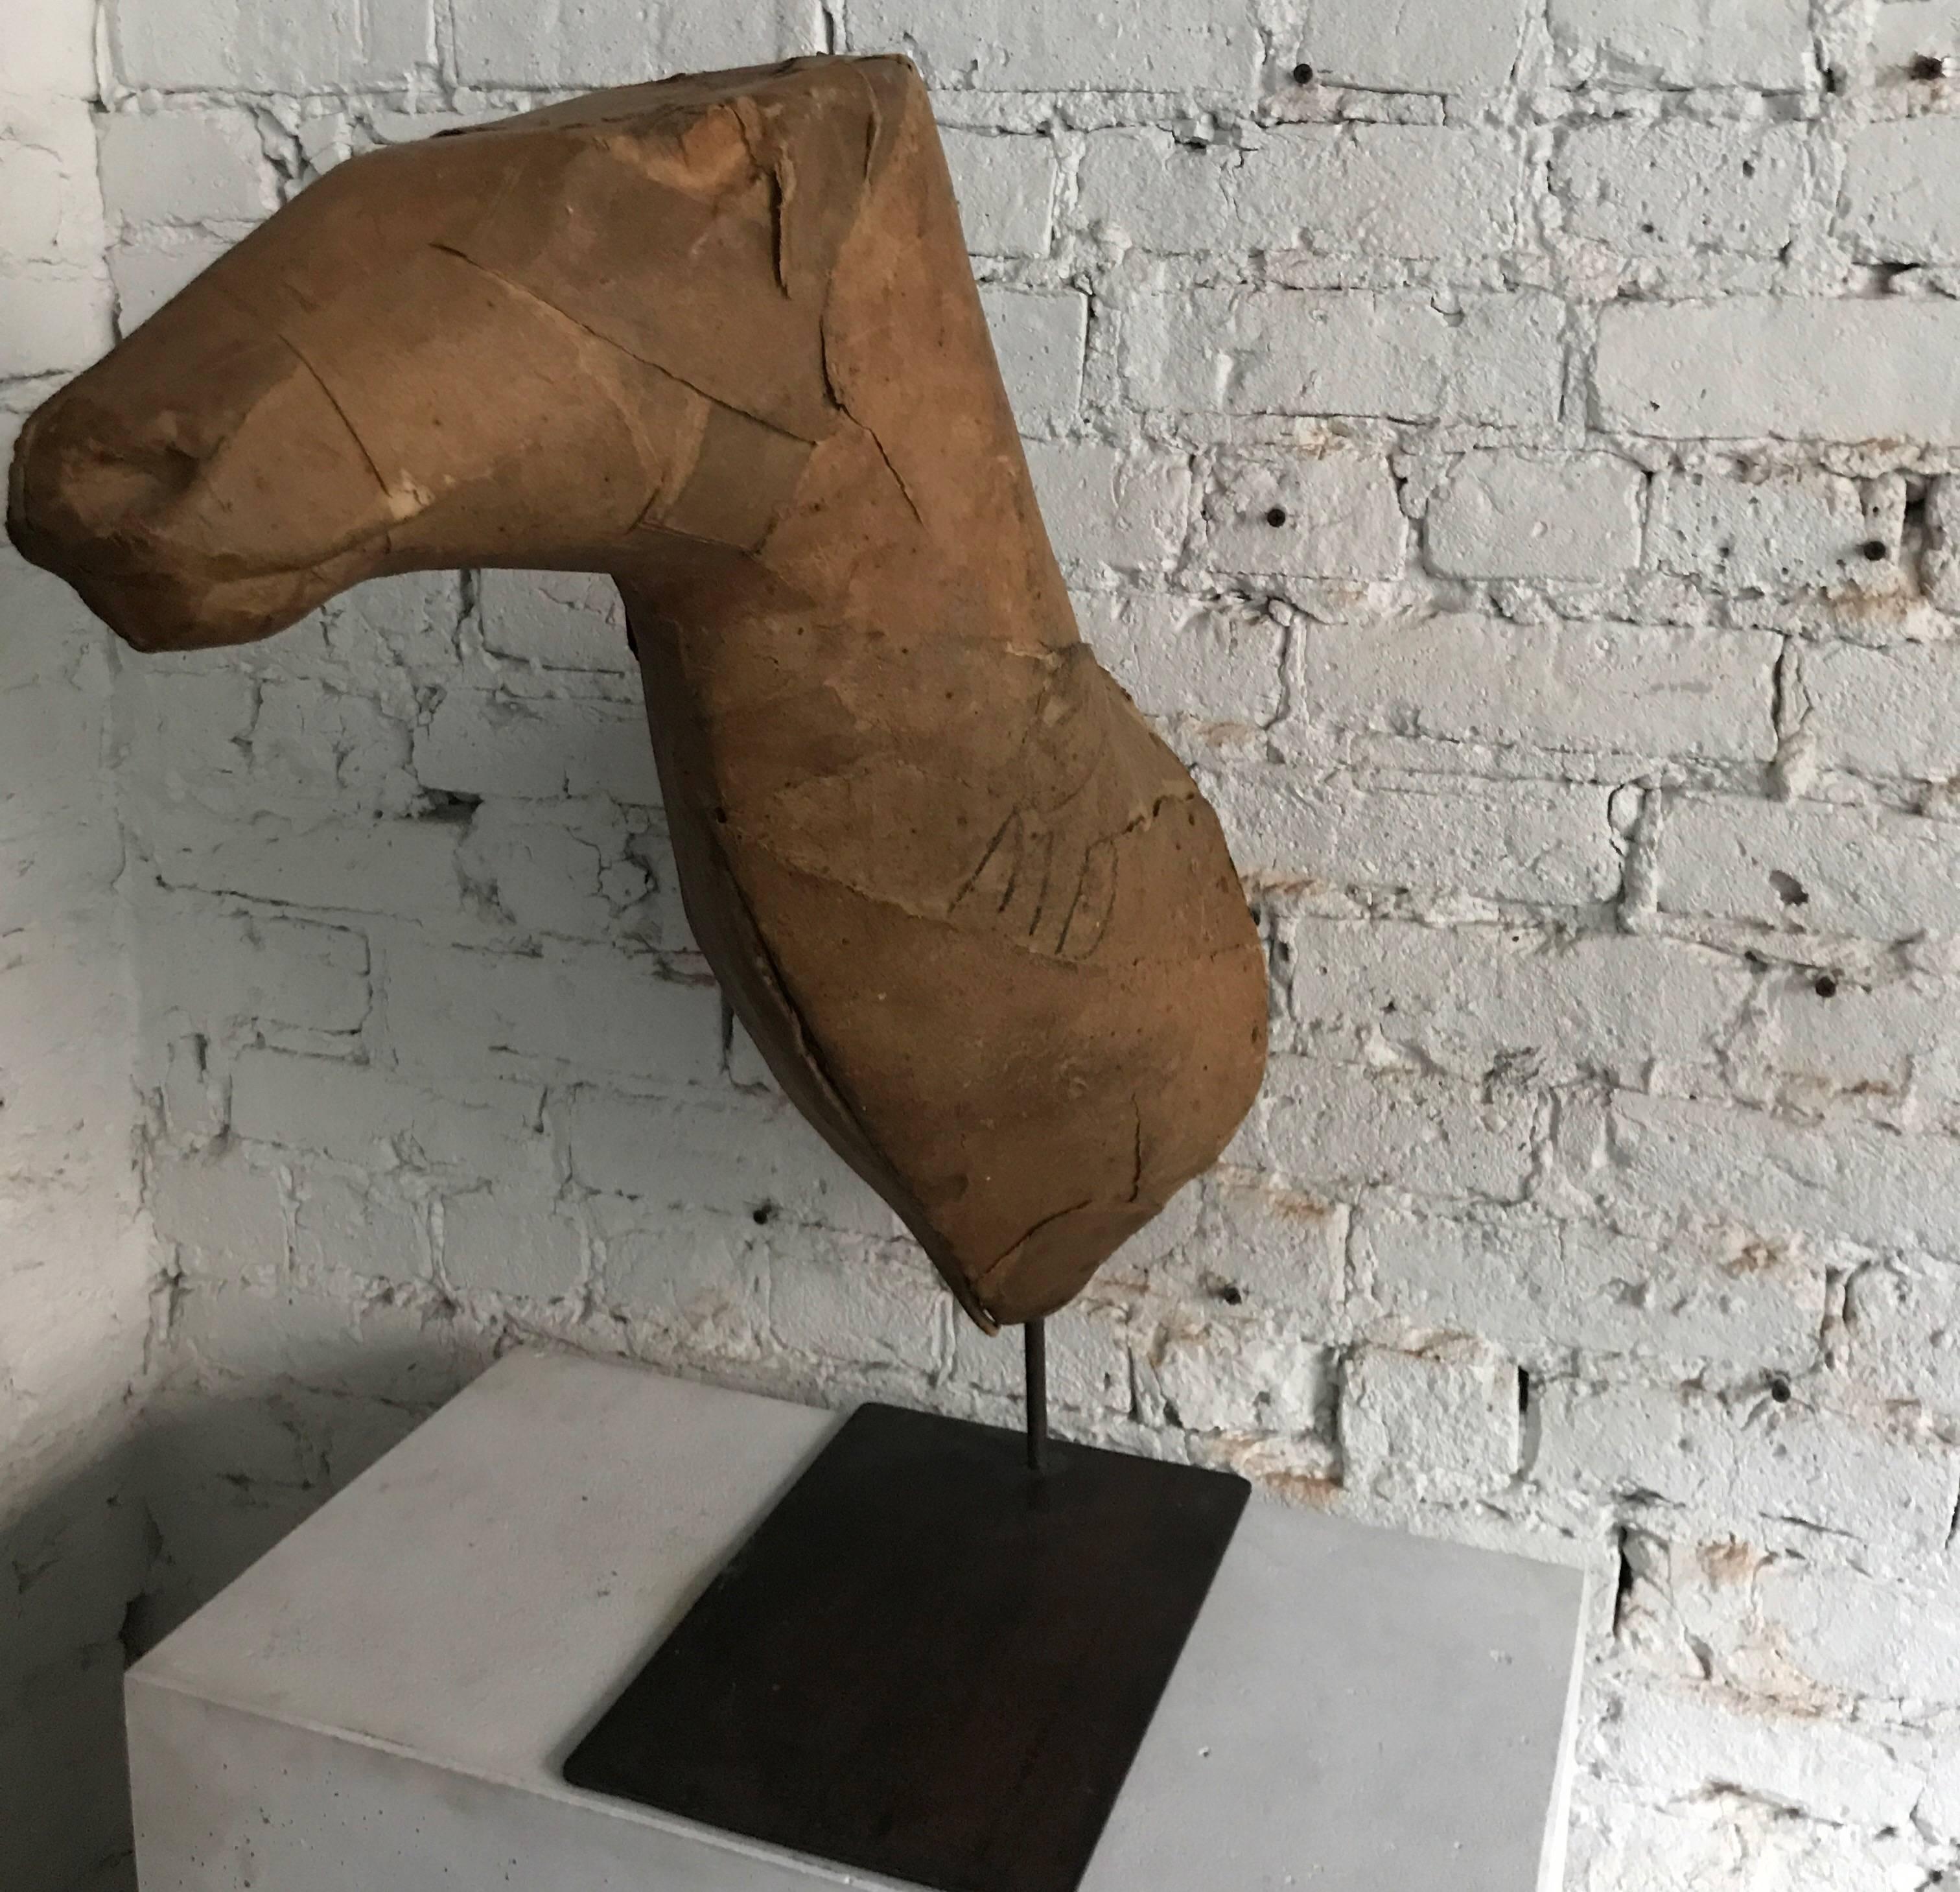 Early 20th century Taxidermy mold horse head
This is a cool an unusual object for the wall (stand is easily removed) or tabletop as a decorative piece



Measures: Actual Horse is 22.5 inches high x 19 inches deep x 10 inches wide
The stand is